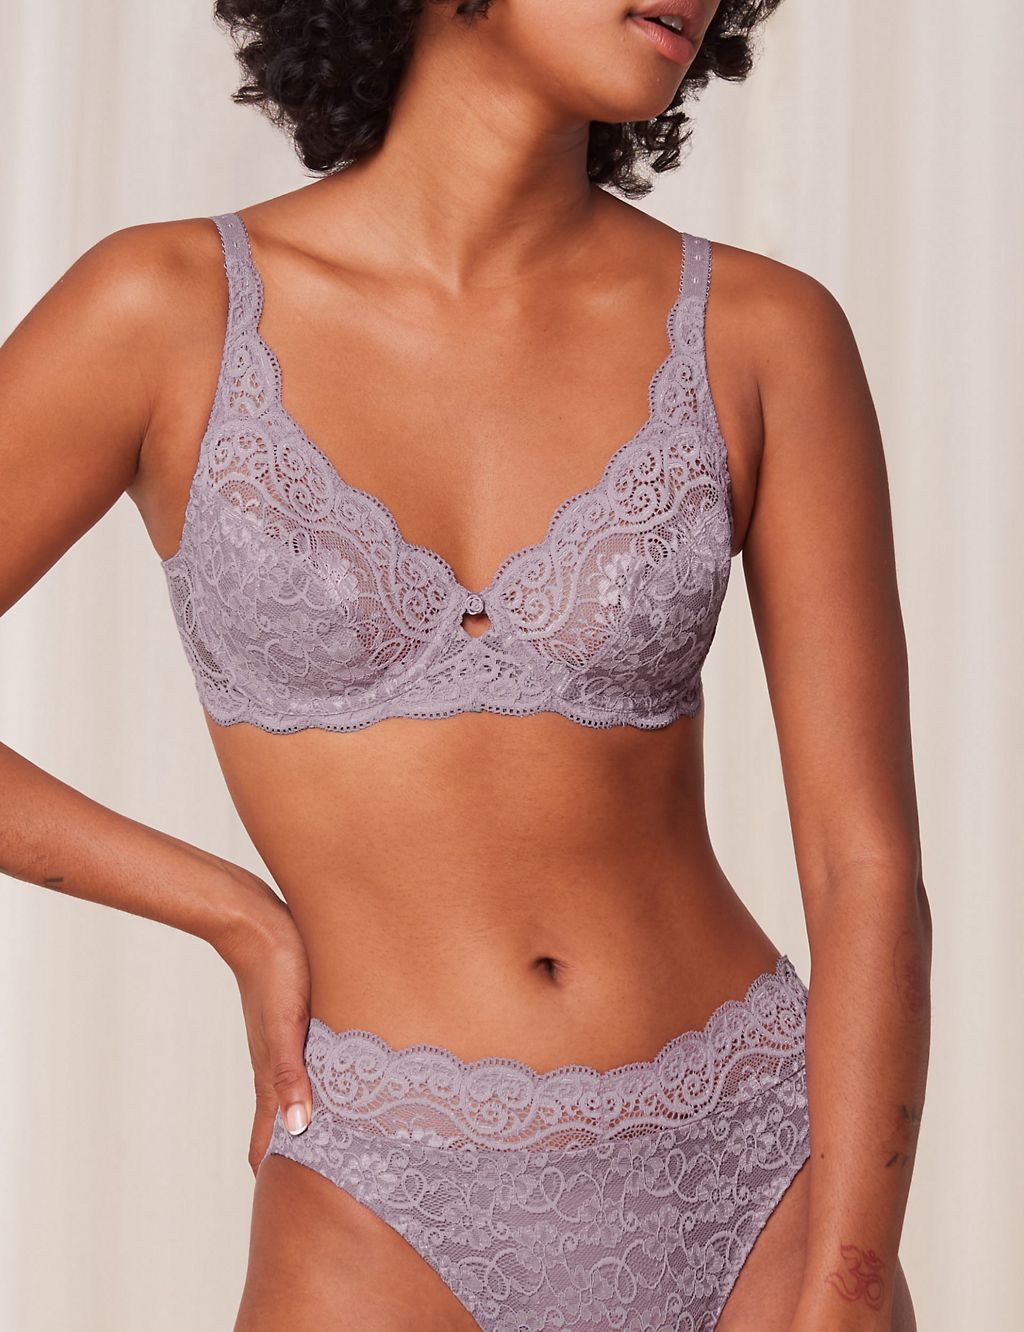 Amourette 300 Lace Underwired Full Cup Bra B-G 3 of 5